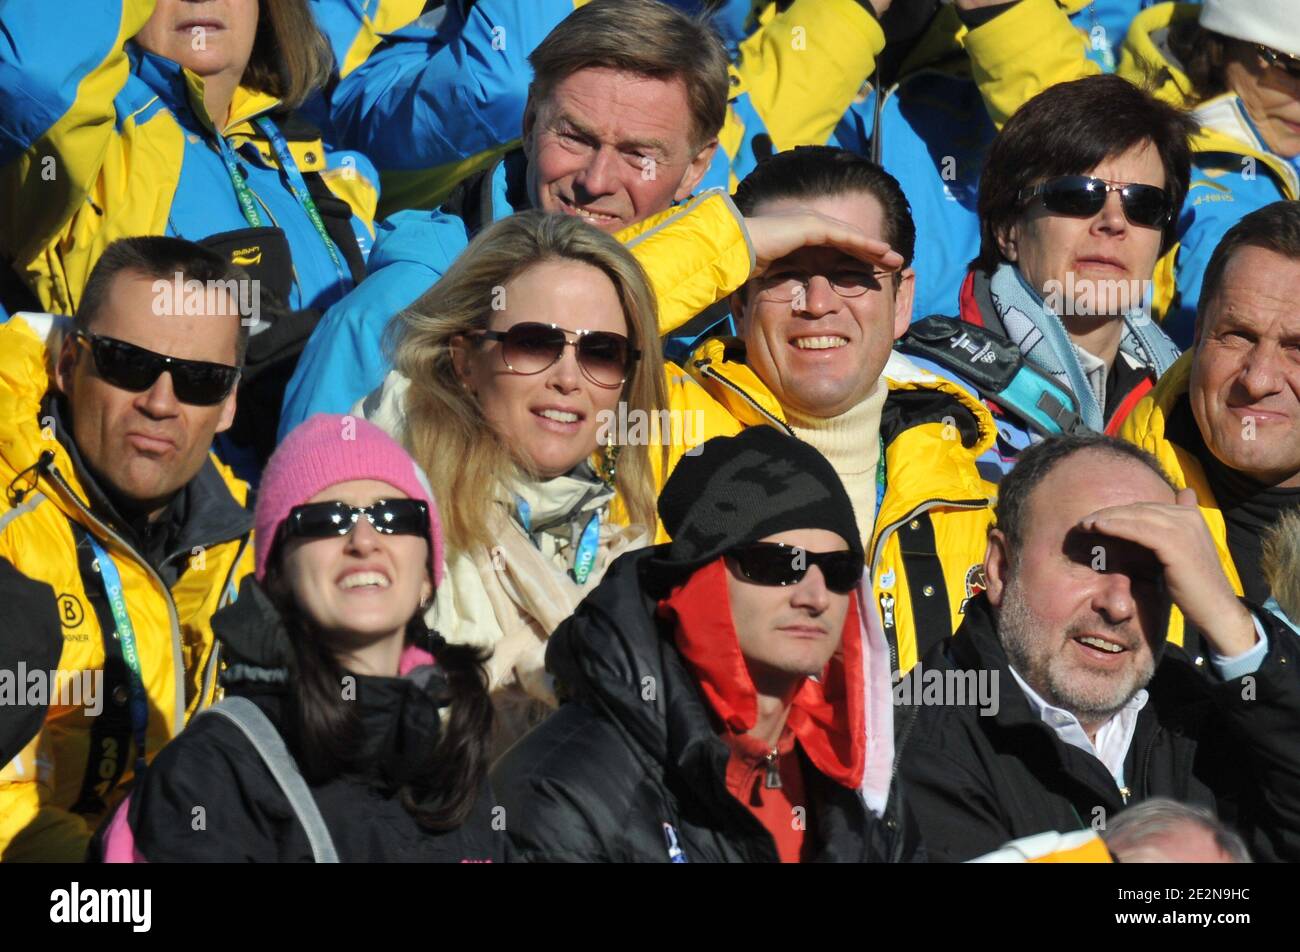 Defense minister Karl-Theodor zu Guttenberg of Germany and his wife Stephanie attend the Alpine skiing Women's Super G for the Vancouver 2010 XXI Olympic Winter Games at Creekside park in Whistler, Canada on February 20, 2010. Photo by Gouhier-Hahn-Nebinger/ABACAPRESS.COM Stock Photo